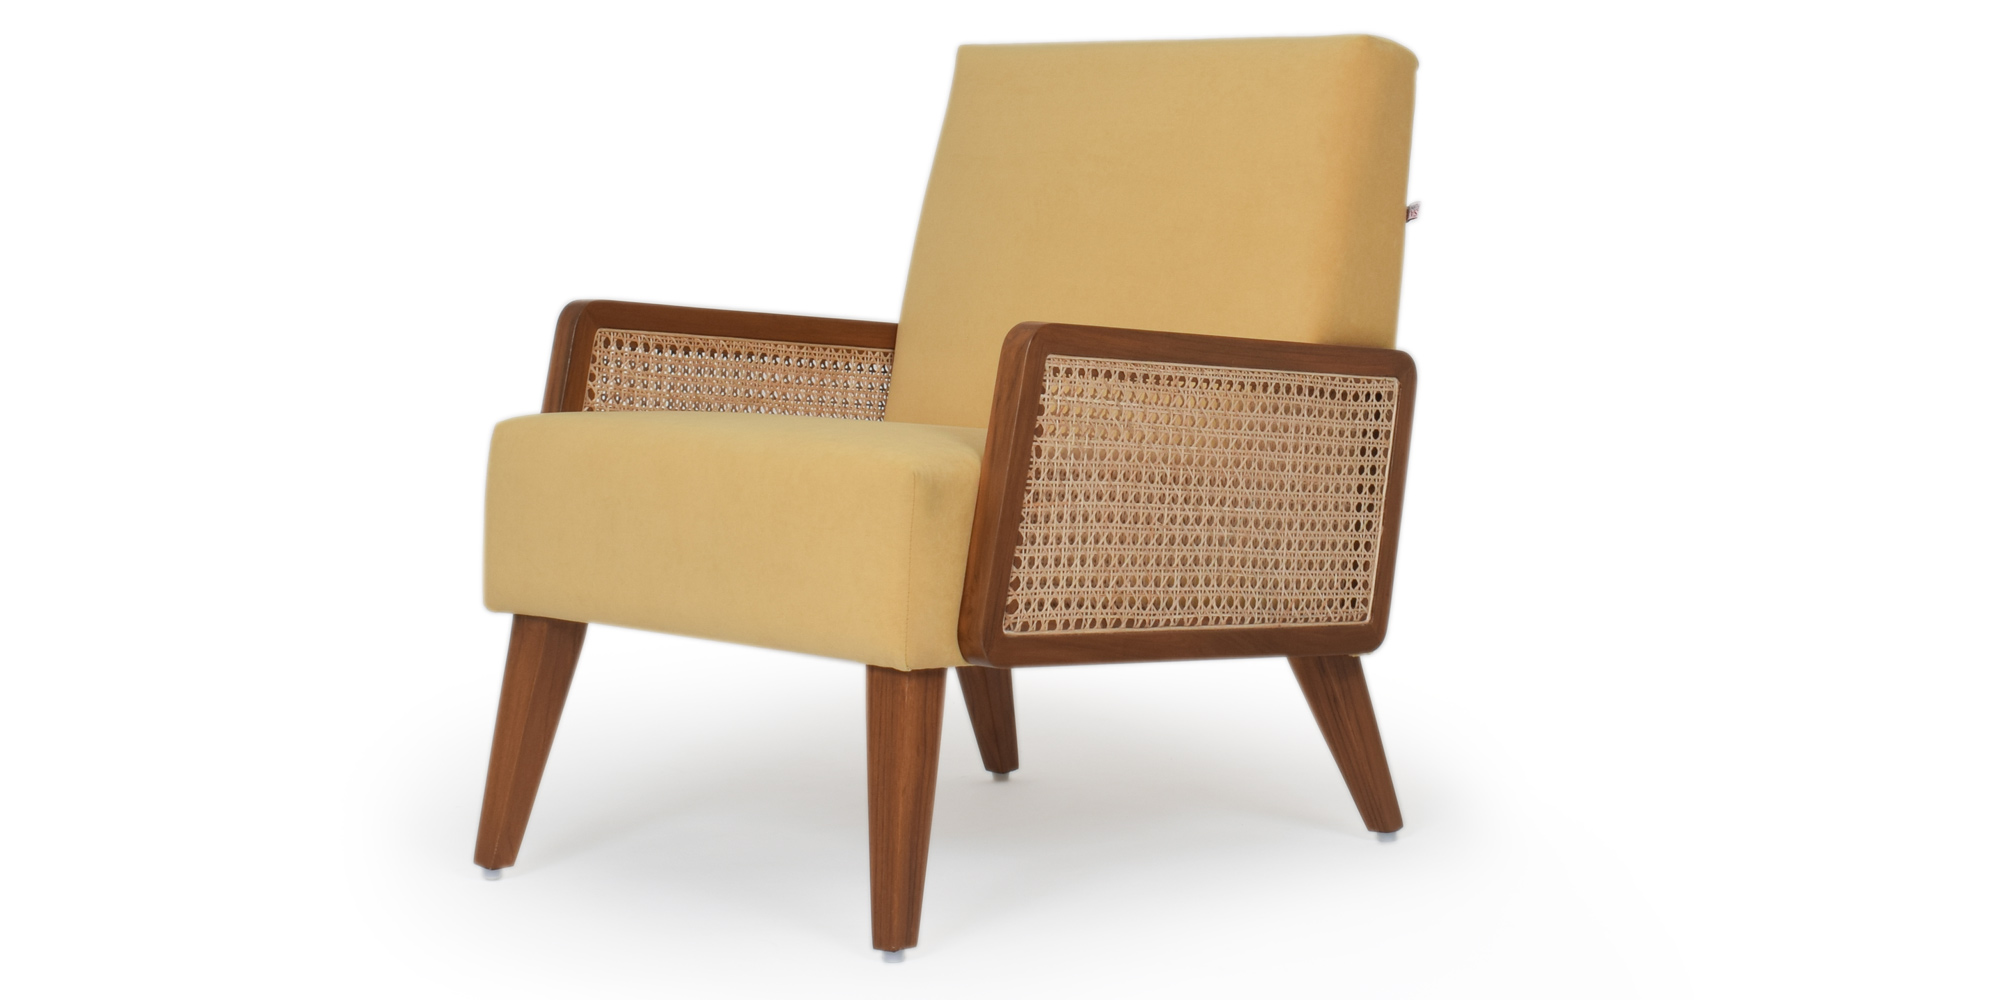 Oasis Lounge Chair Images